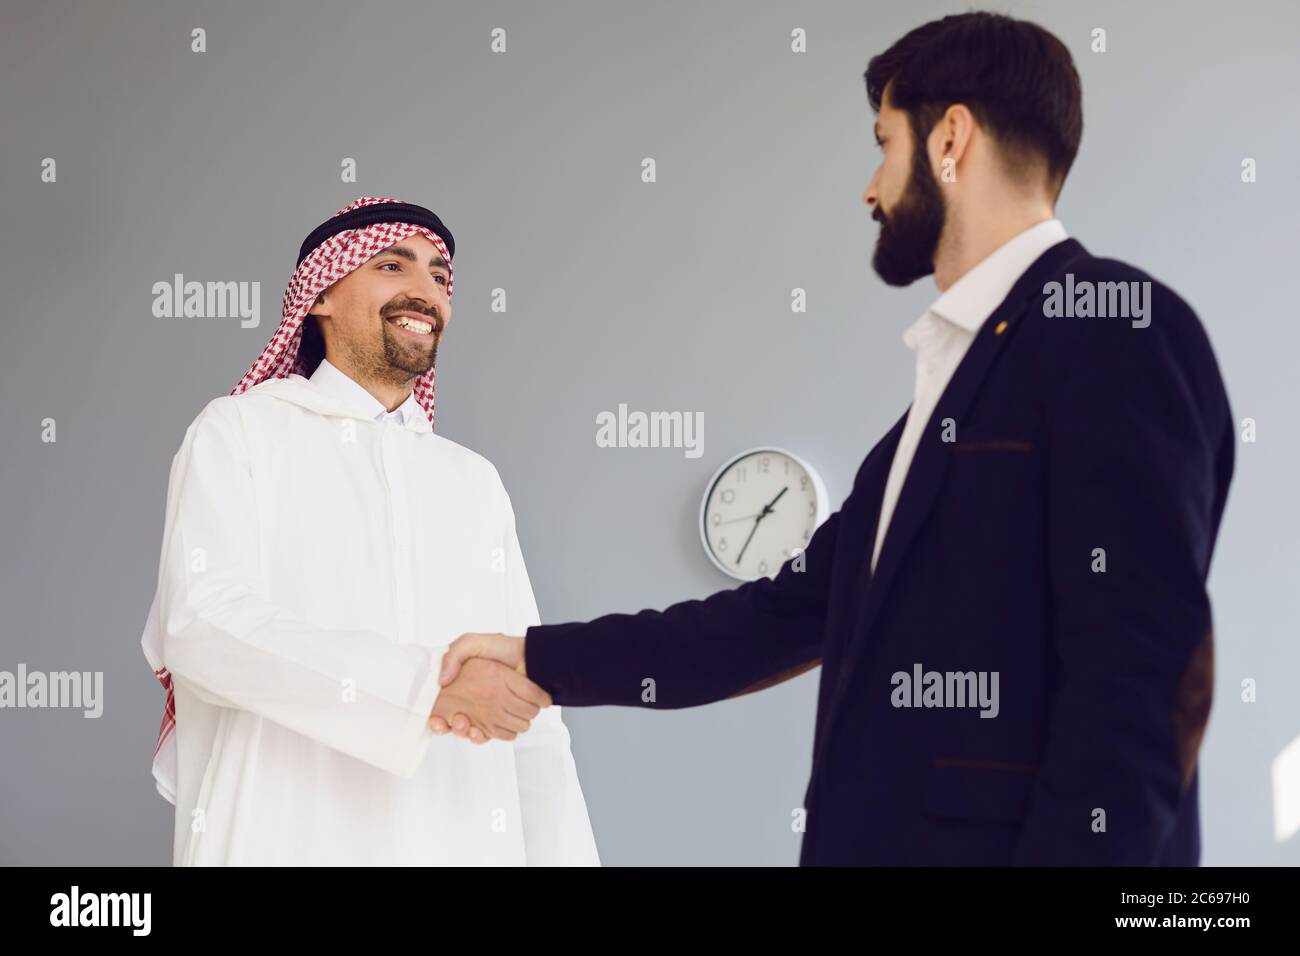 Handshake of arabic and european businesspeople in office. Stock Photo